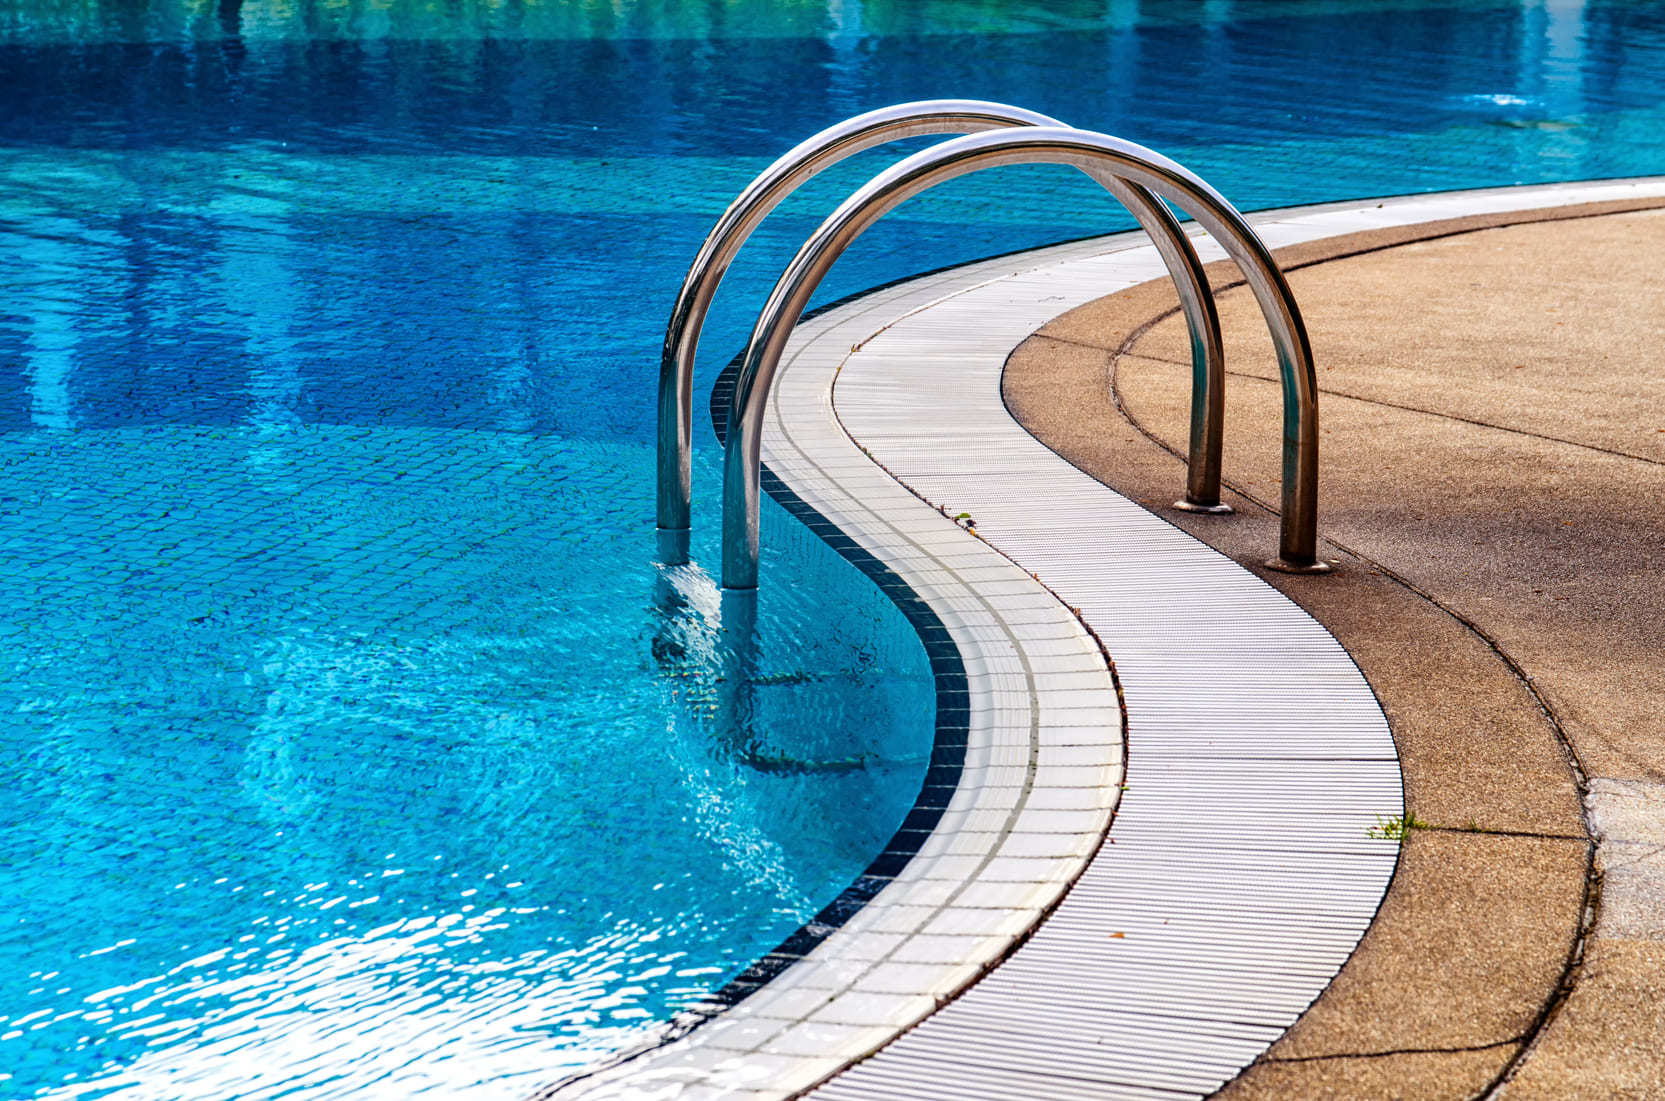 A curved shaped pool with a ladder going into the water